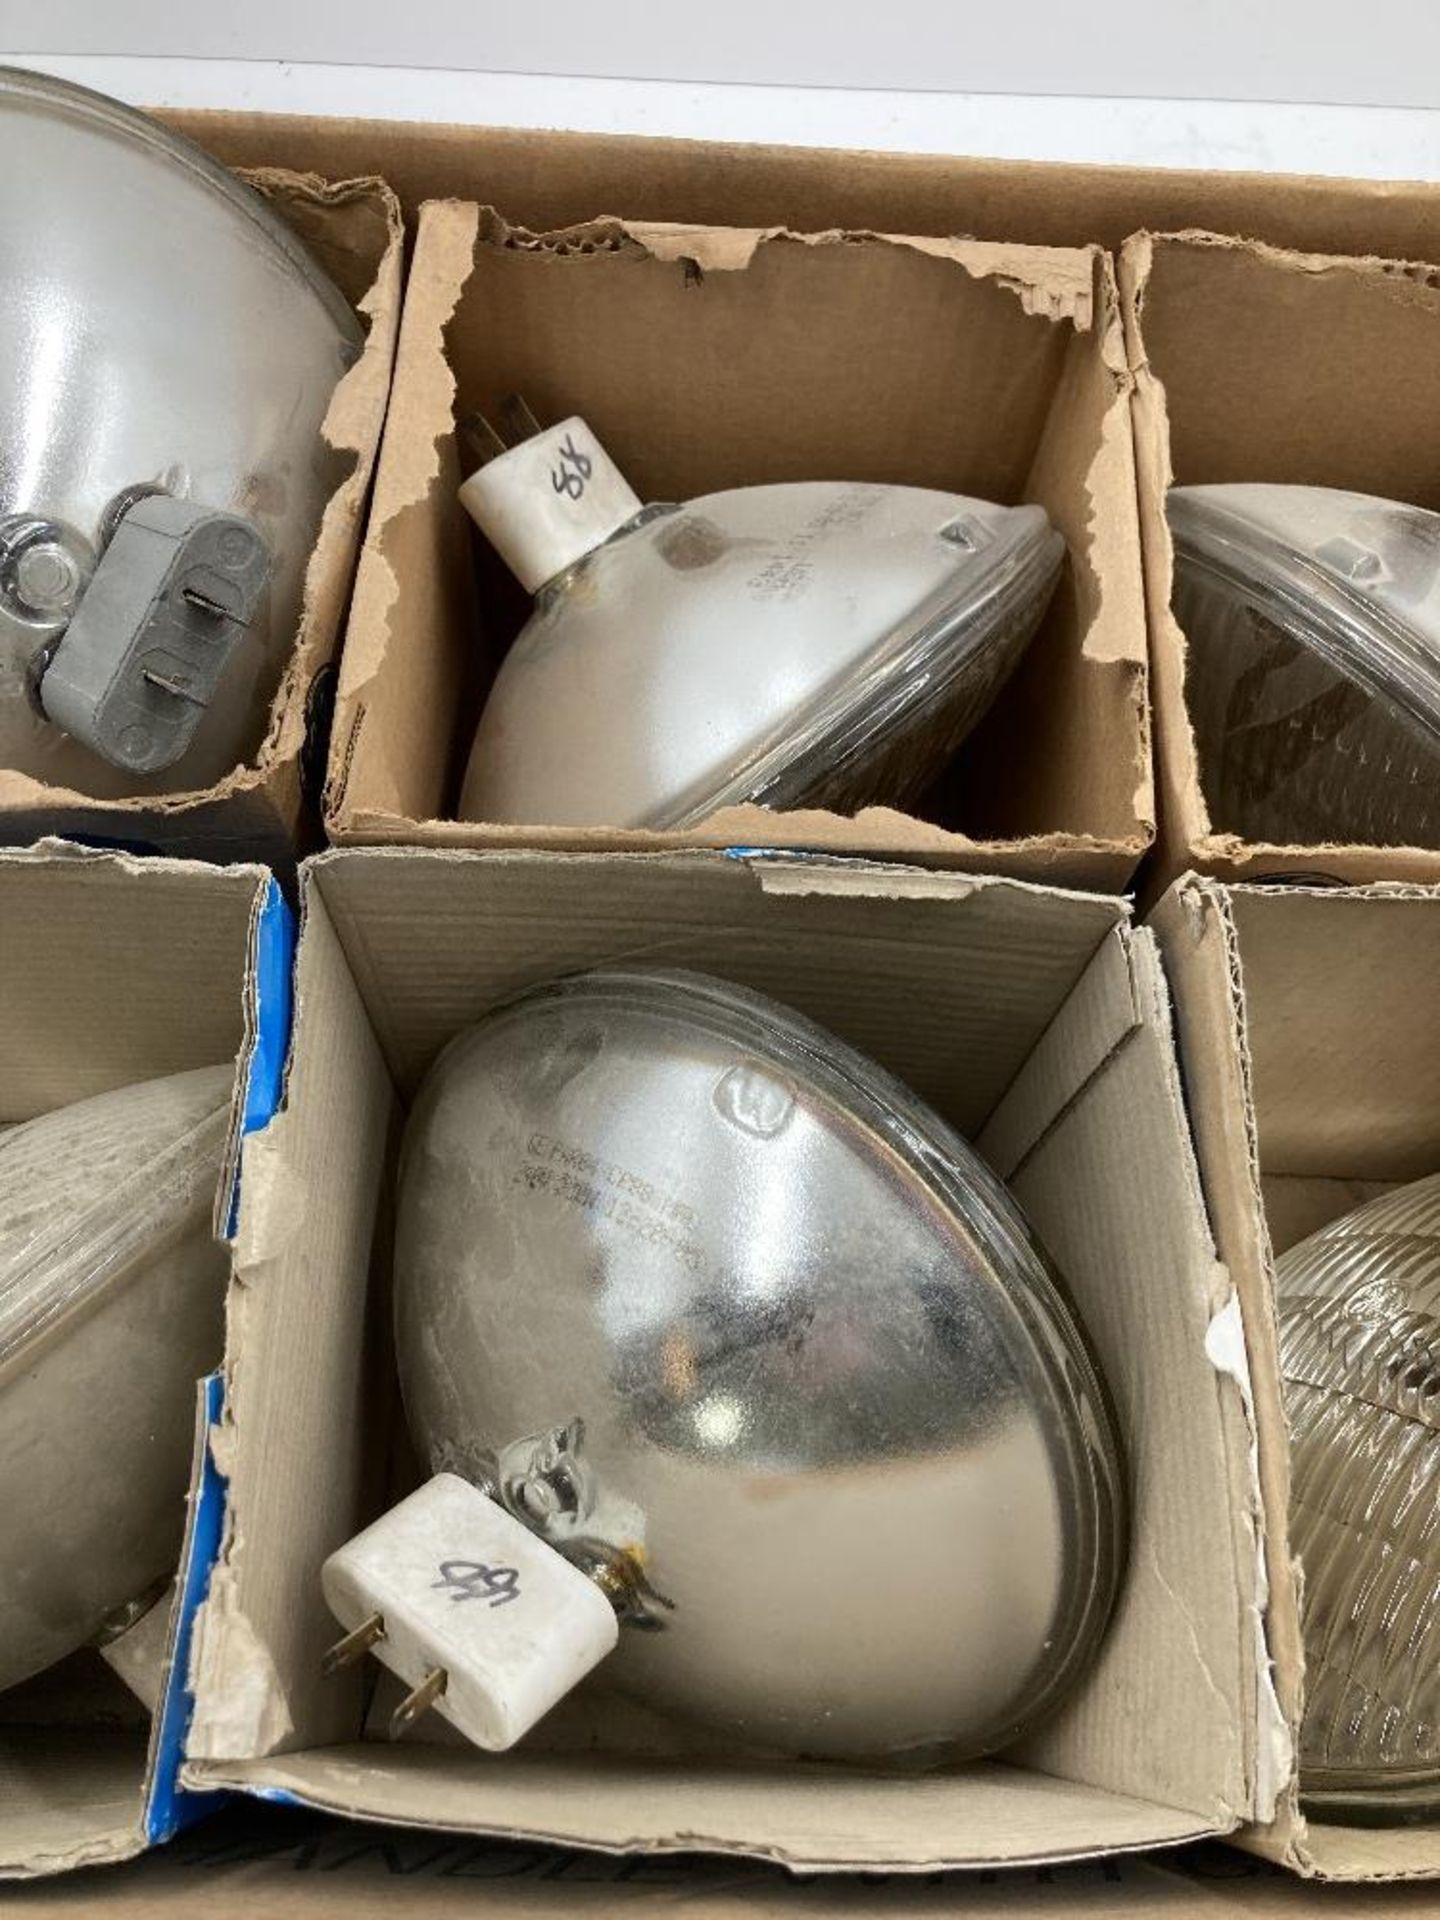 Large Quantity of Various Lamps and Bulbs - Image 15 of 47